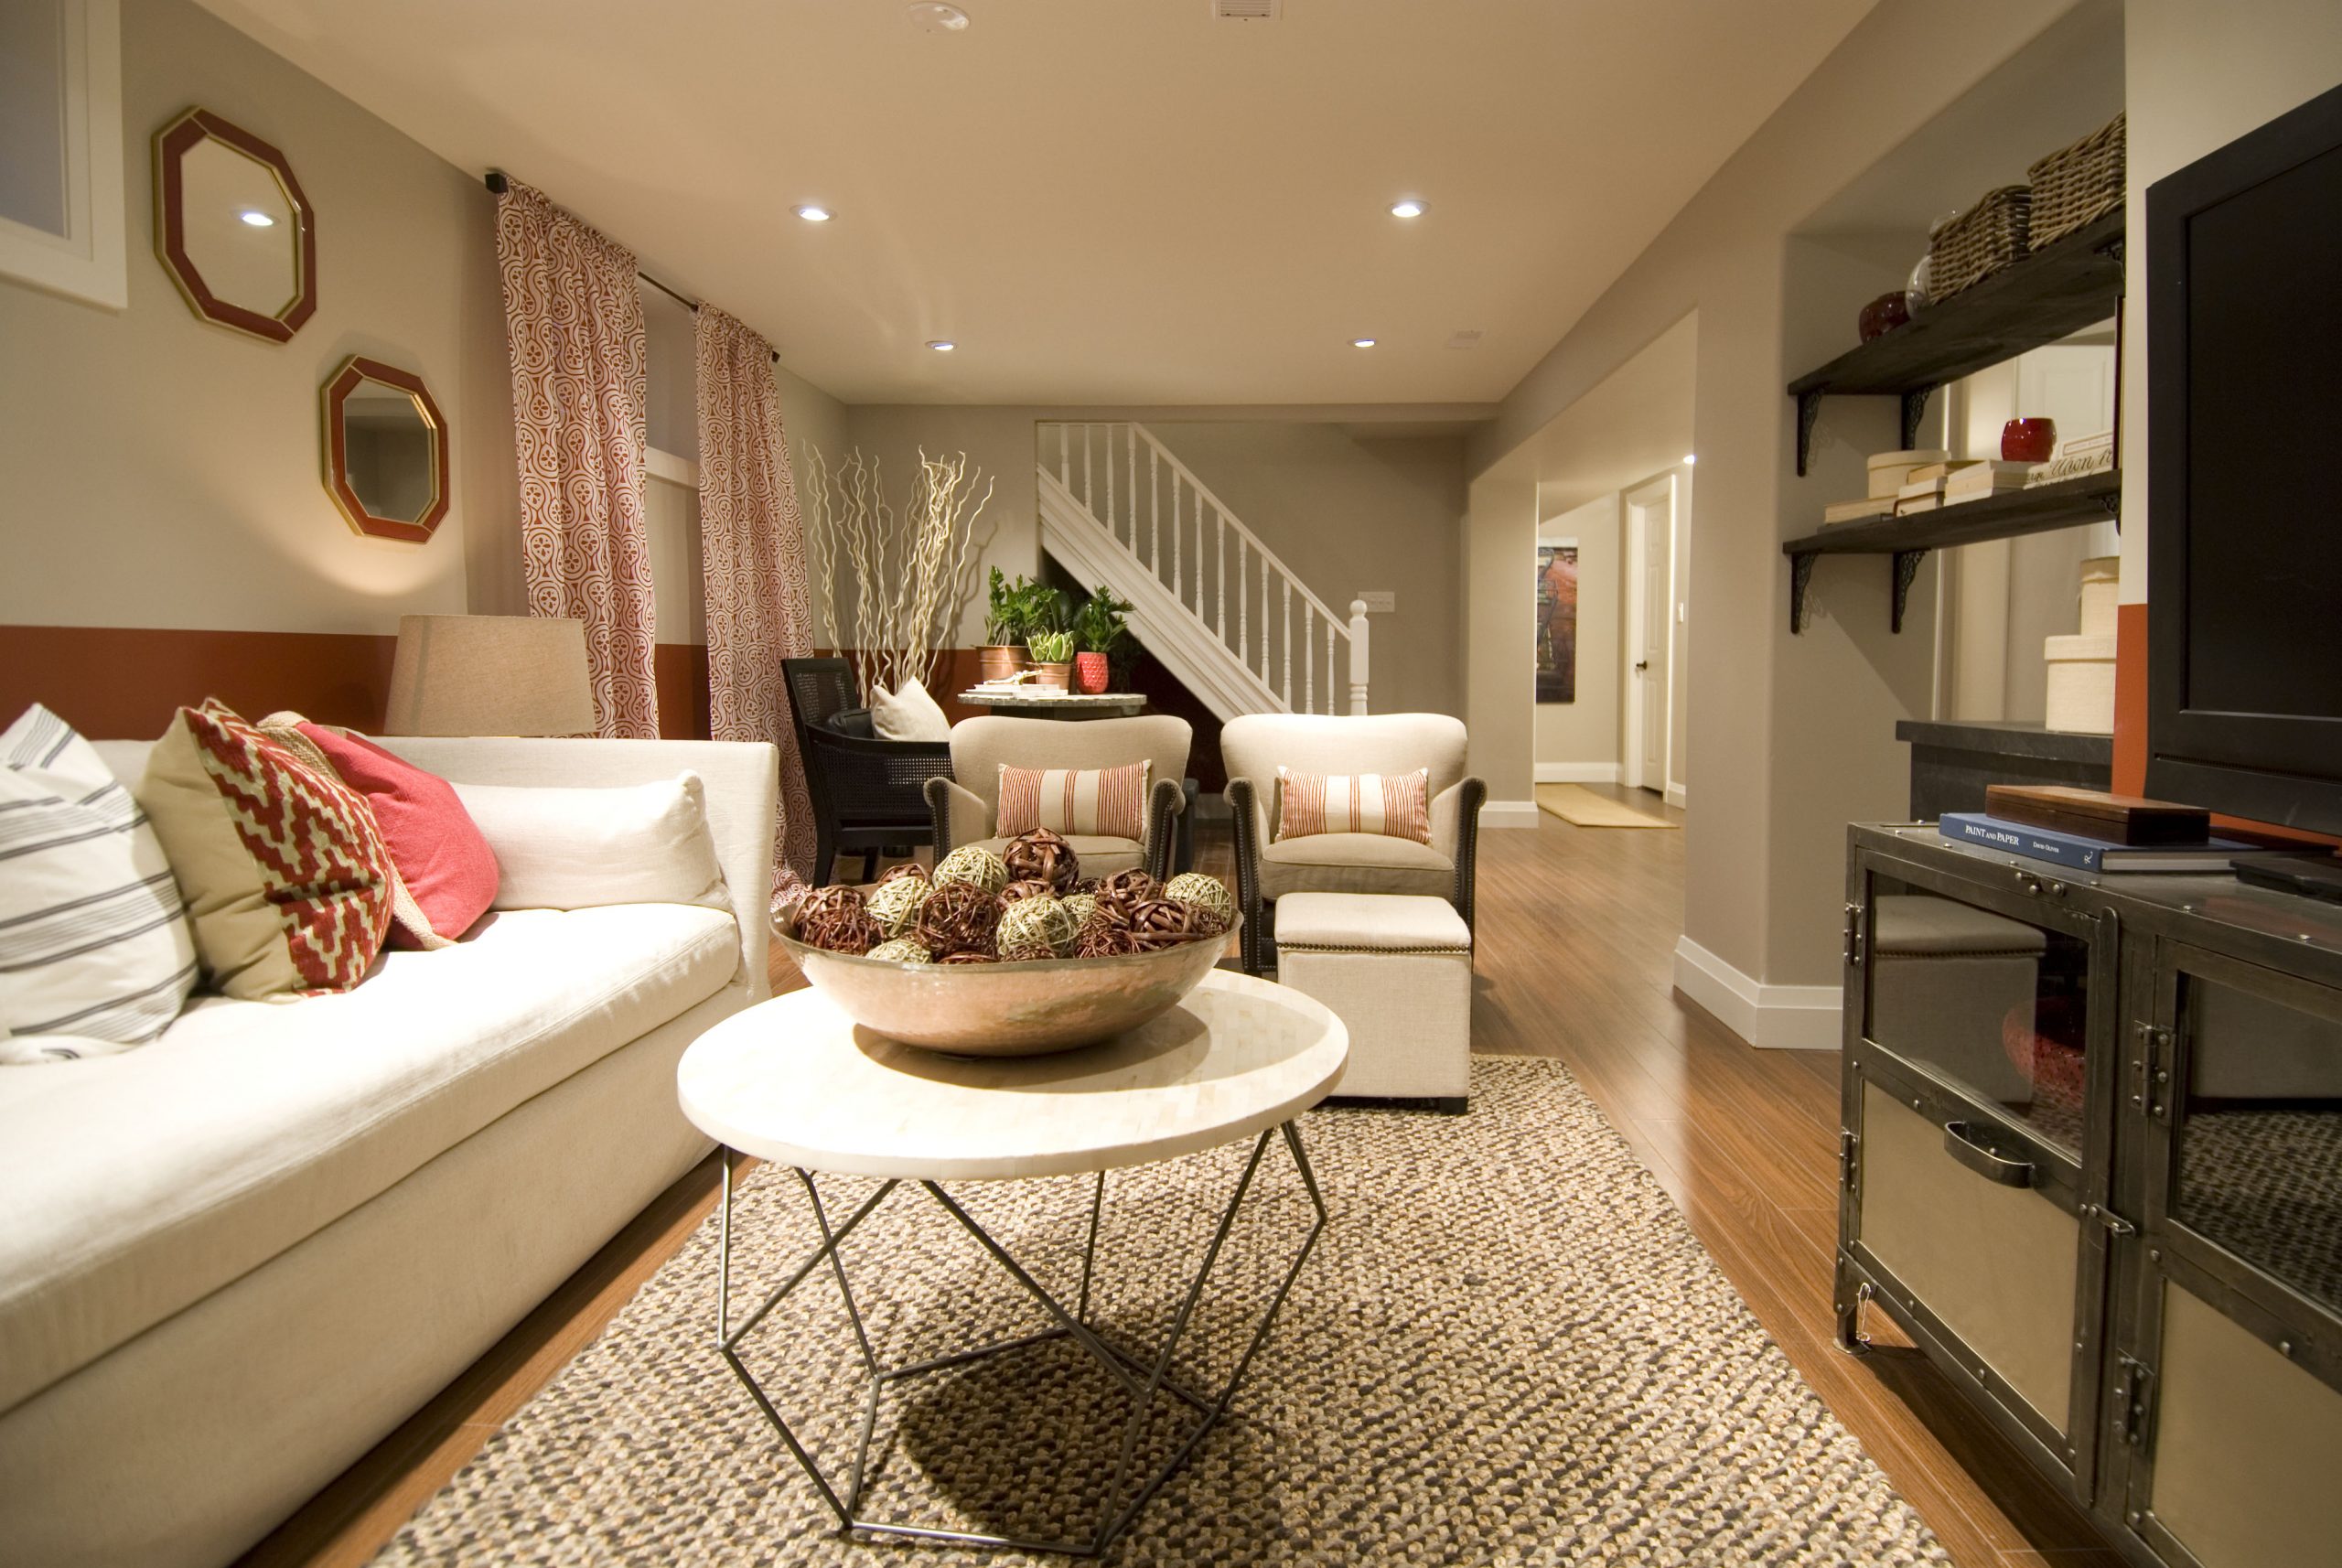 Basement apartment with white sofa and pink accents